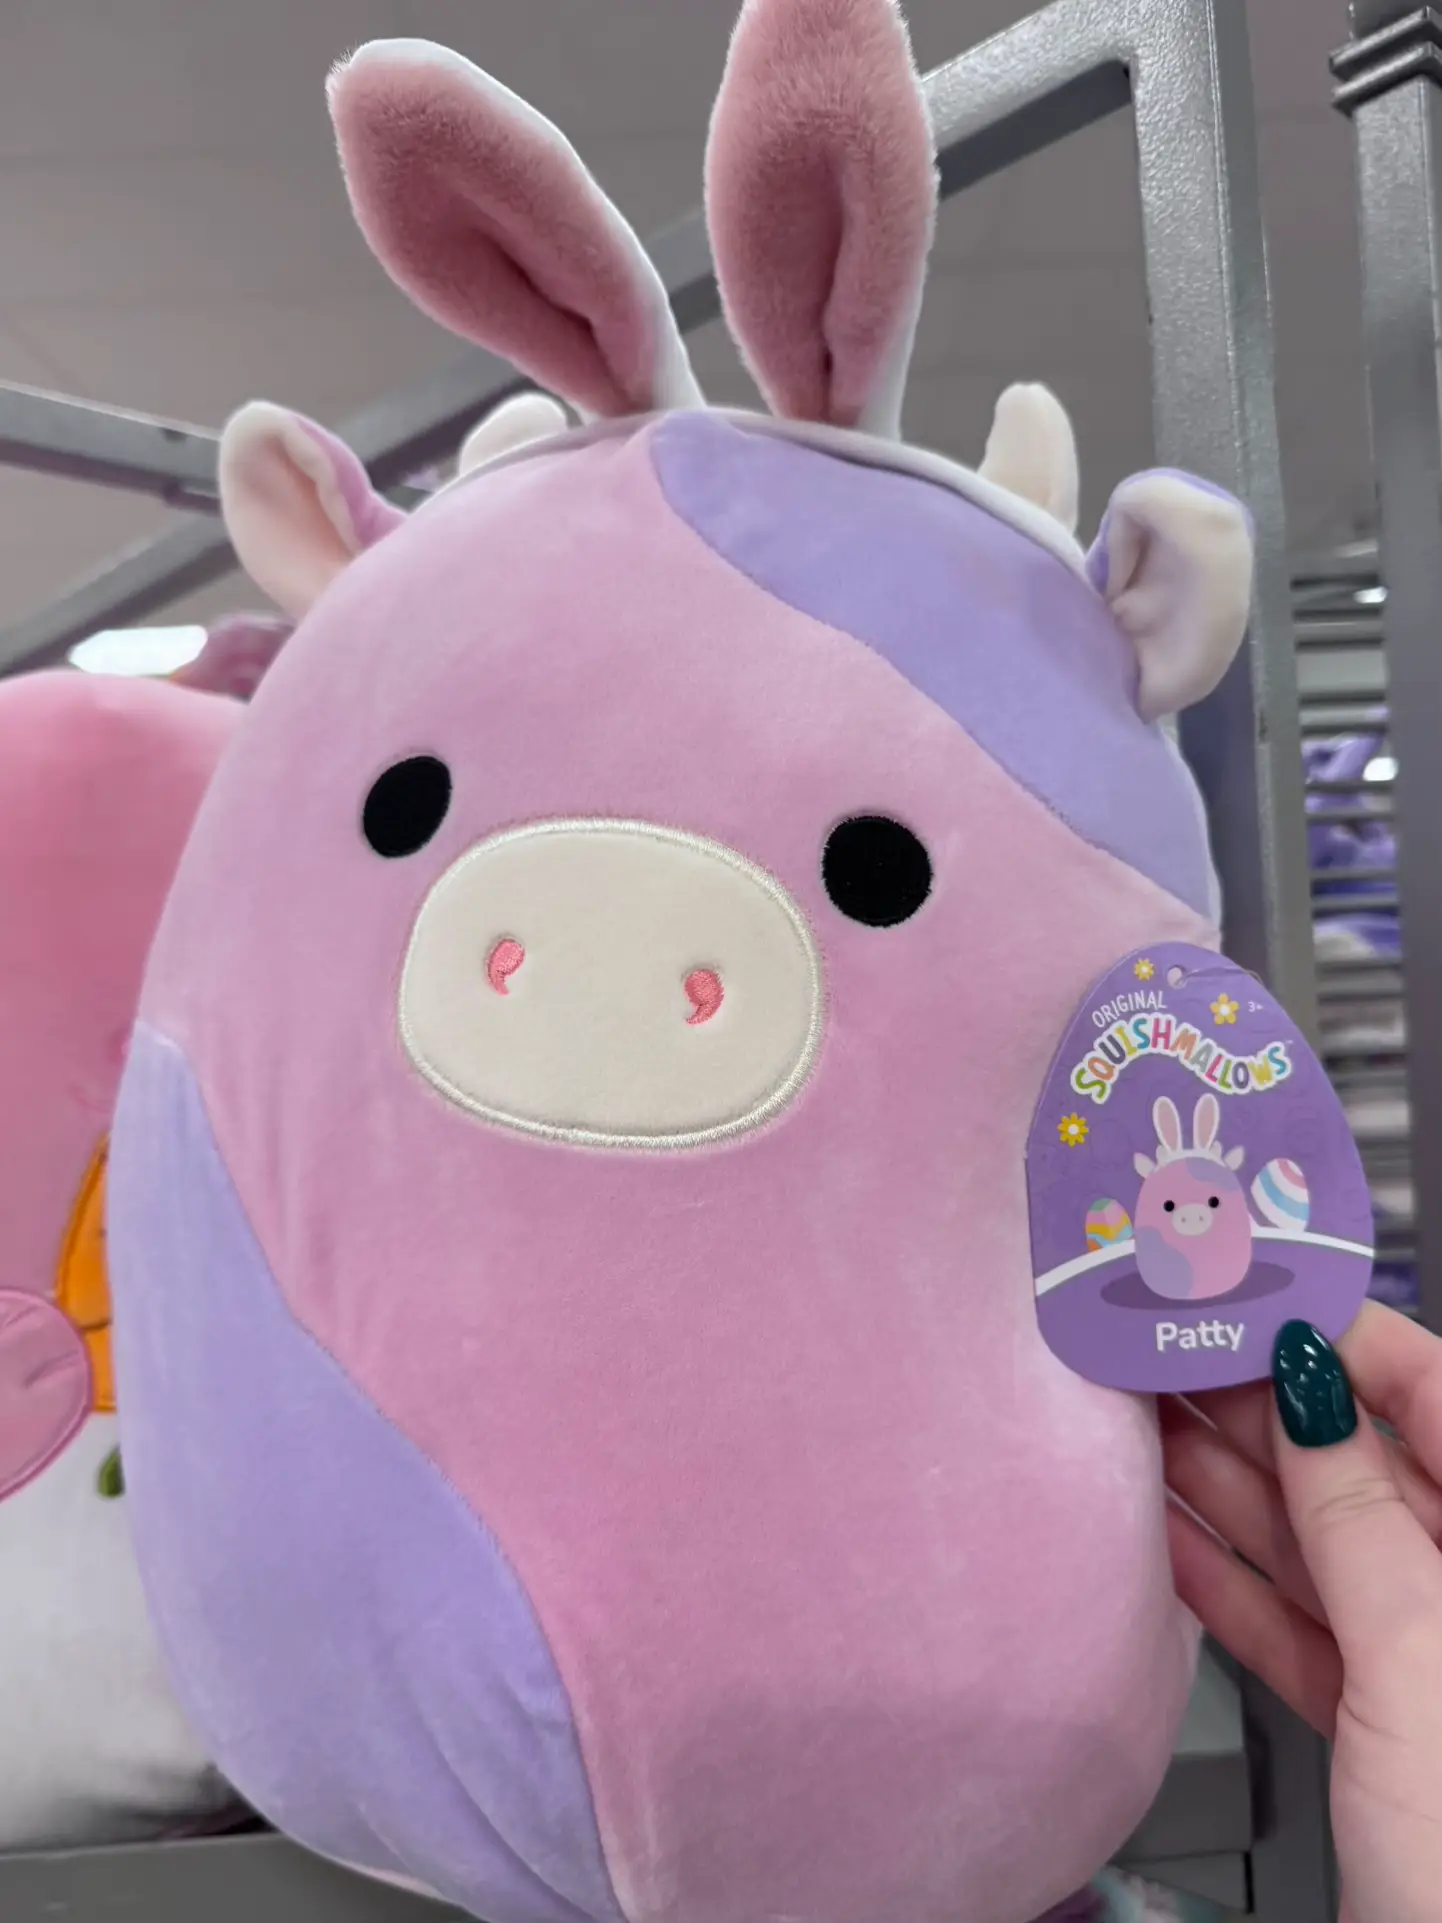 lexi on X: THE SQUISHMALLOW FROG'S NAME IS ROBERT 😭😭😭😭😭   / X